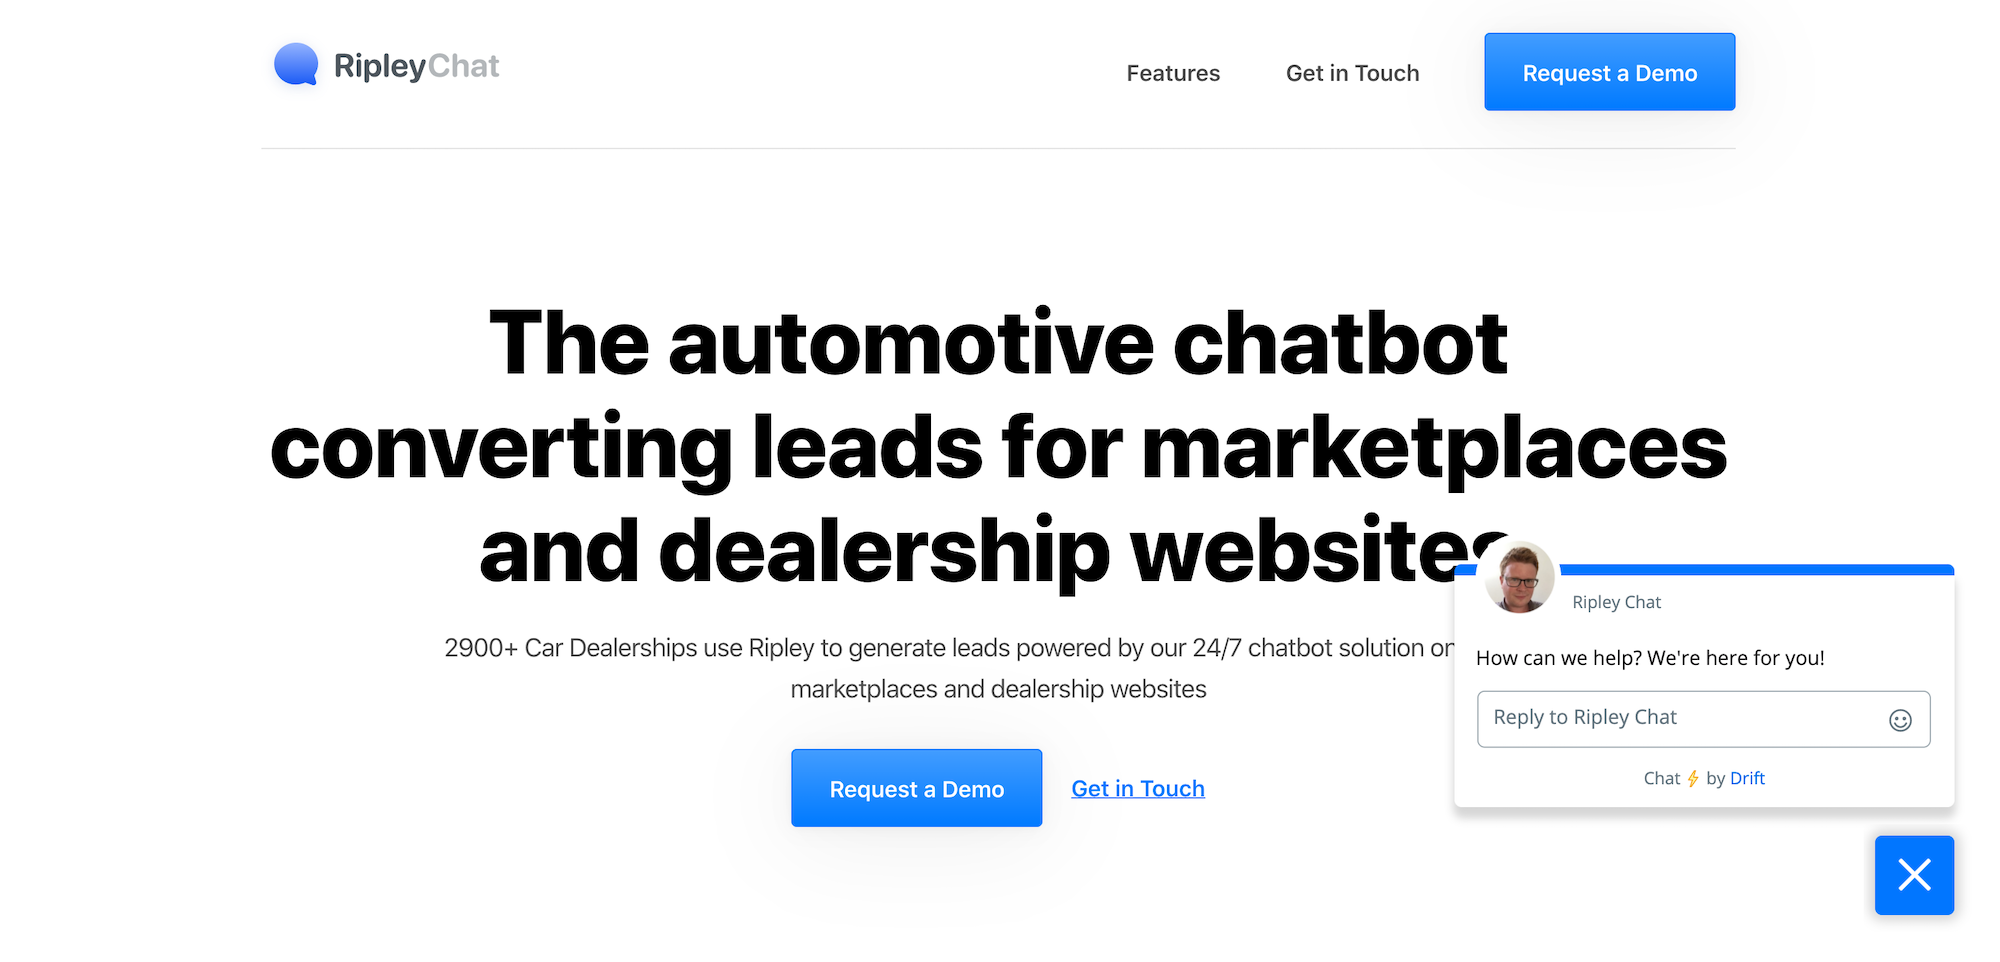 Automotive Live Chat Services - Best For Used Car Dealers 